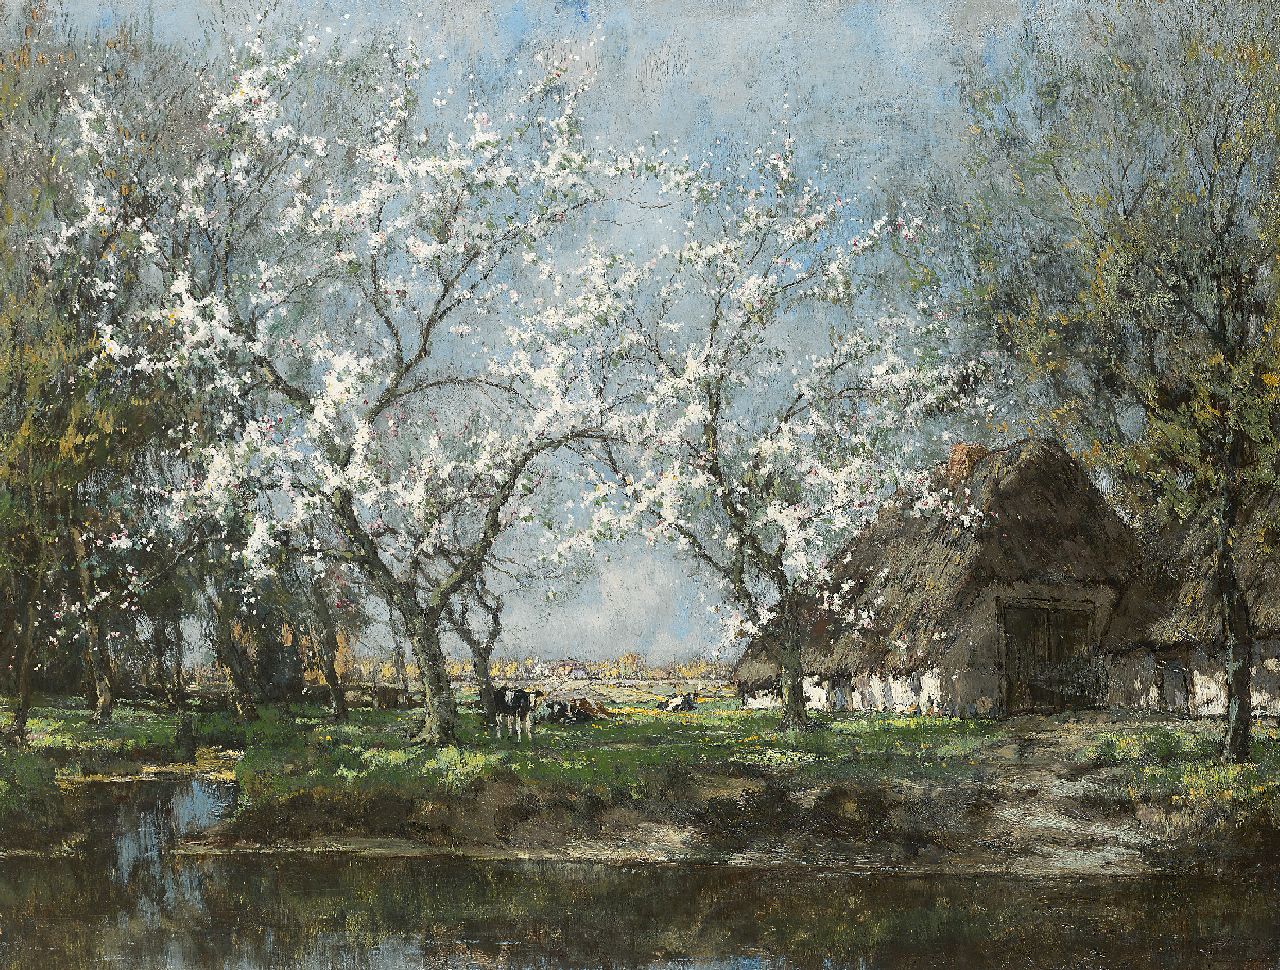 Gorter A.M.  | 'Arnold' Marc Gorter, An orchard in full bloom, oil on canvas 75.5 x 99.8 cm, signed l.r.